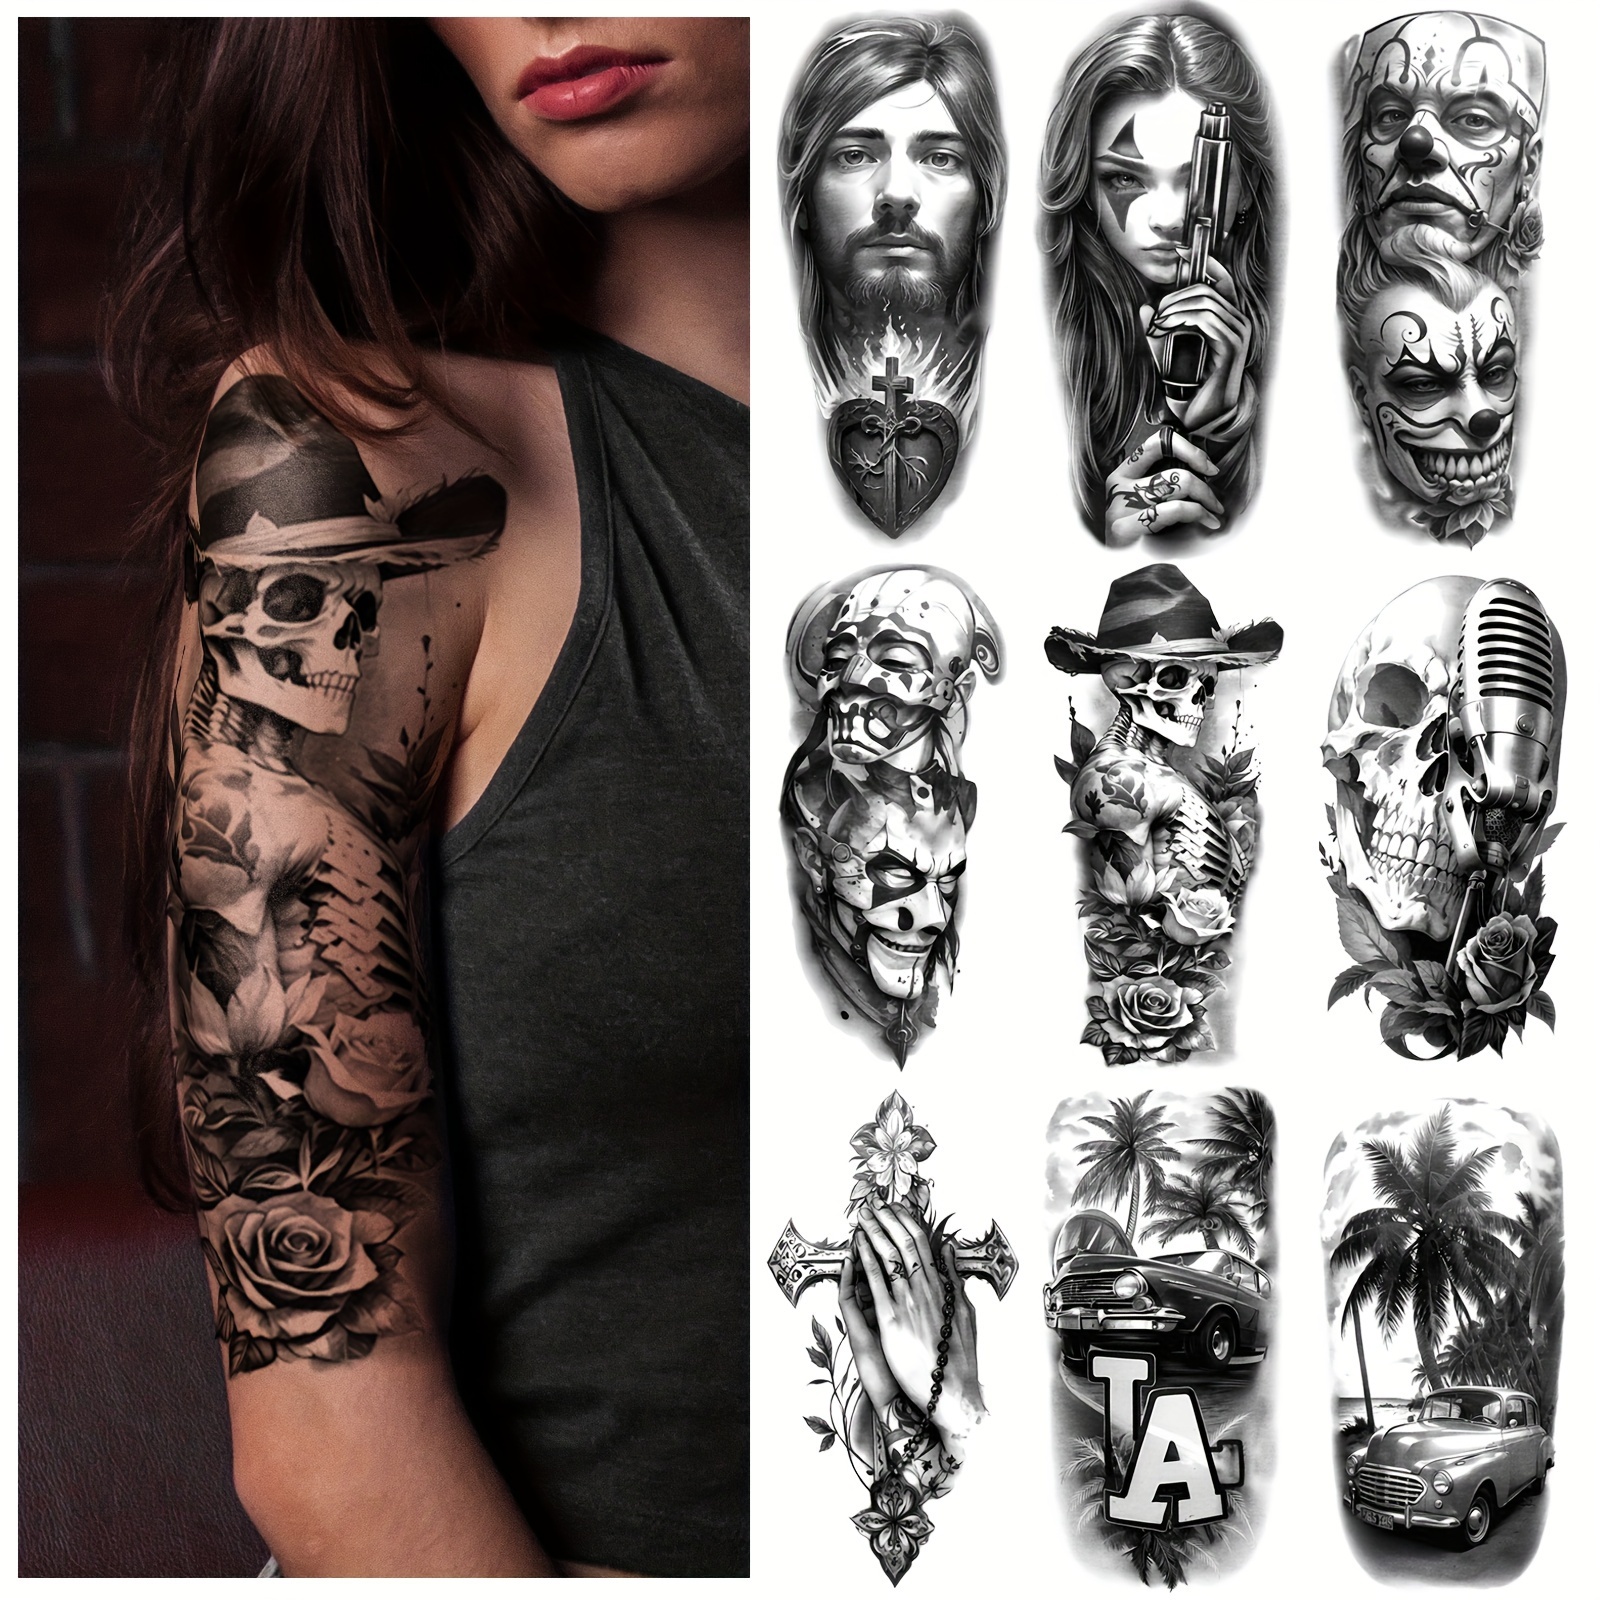 2 Sheets Half Arm Temporary Tattoos -Red and Black Waterproof Fake Tattoos  with Realistic Gothic Girl Roman Numeral Clock Rose Body Art for Men Women  Cute Leg Sleeve Tattoos Stickers for Adults